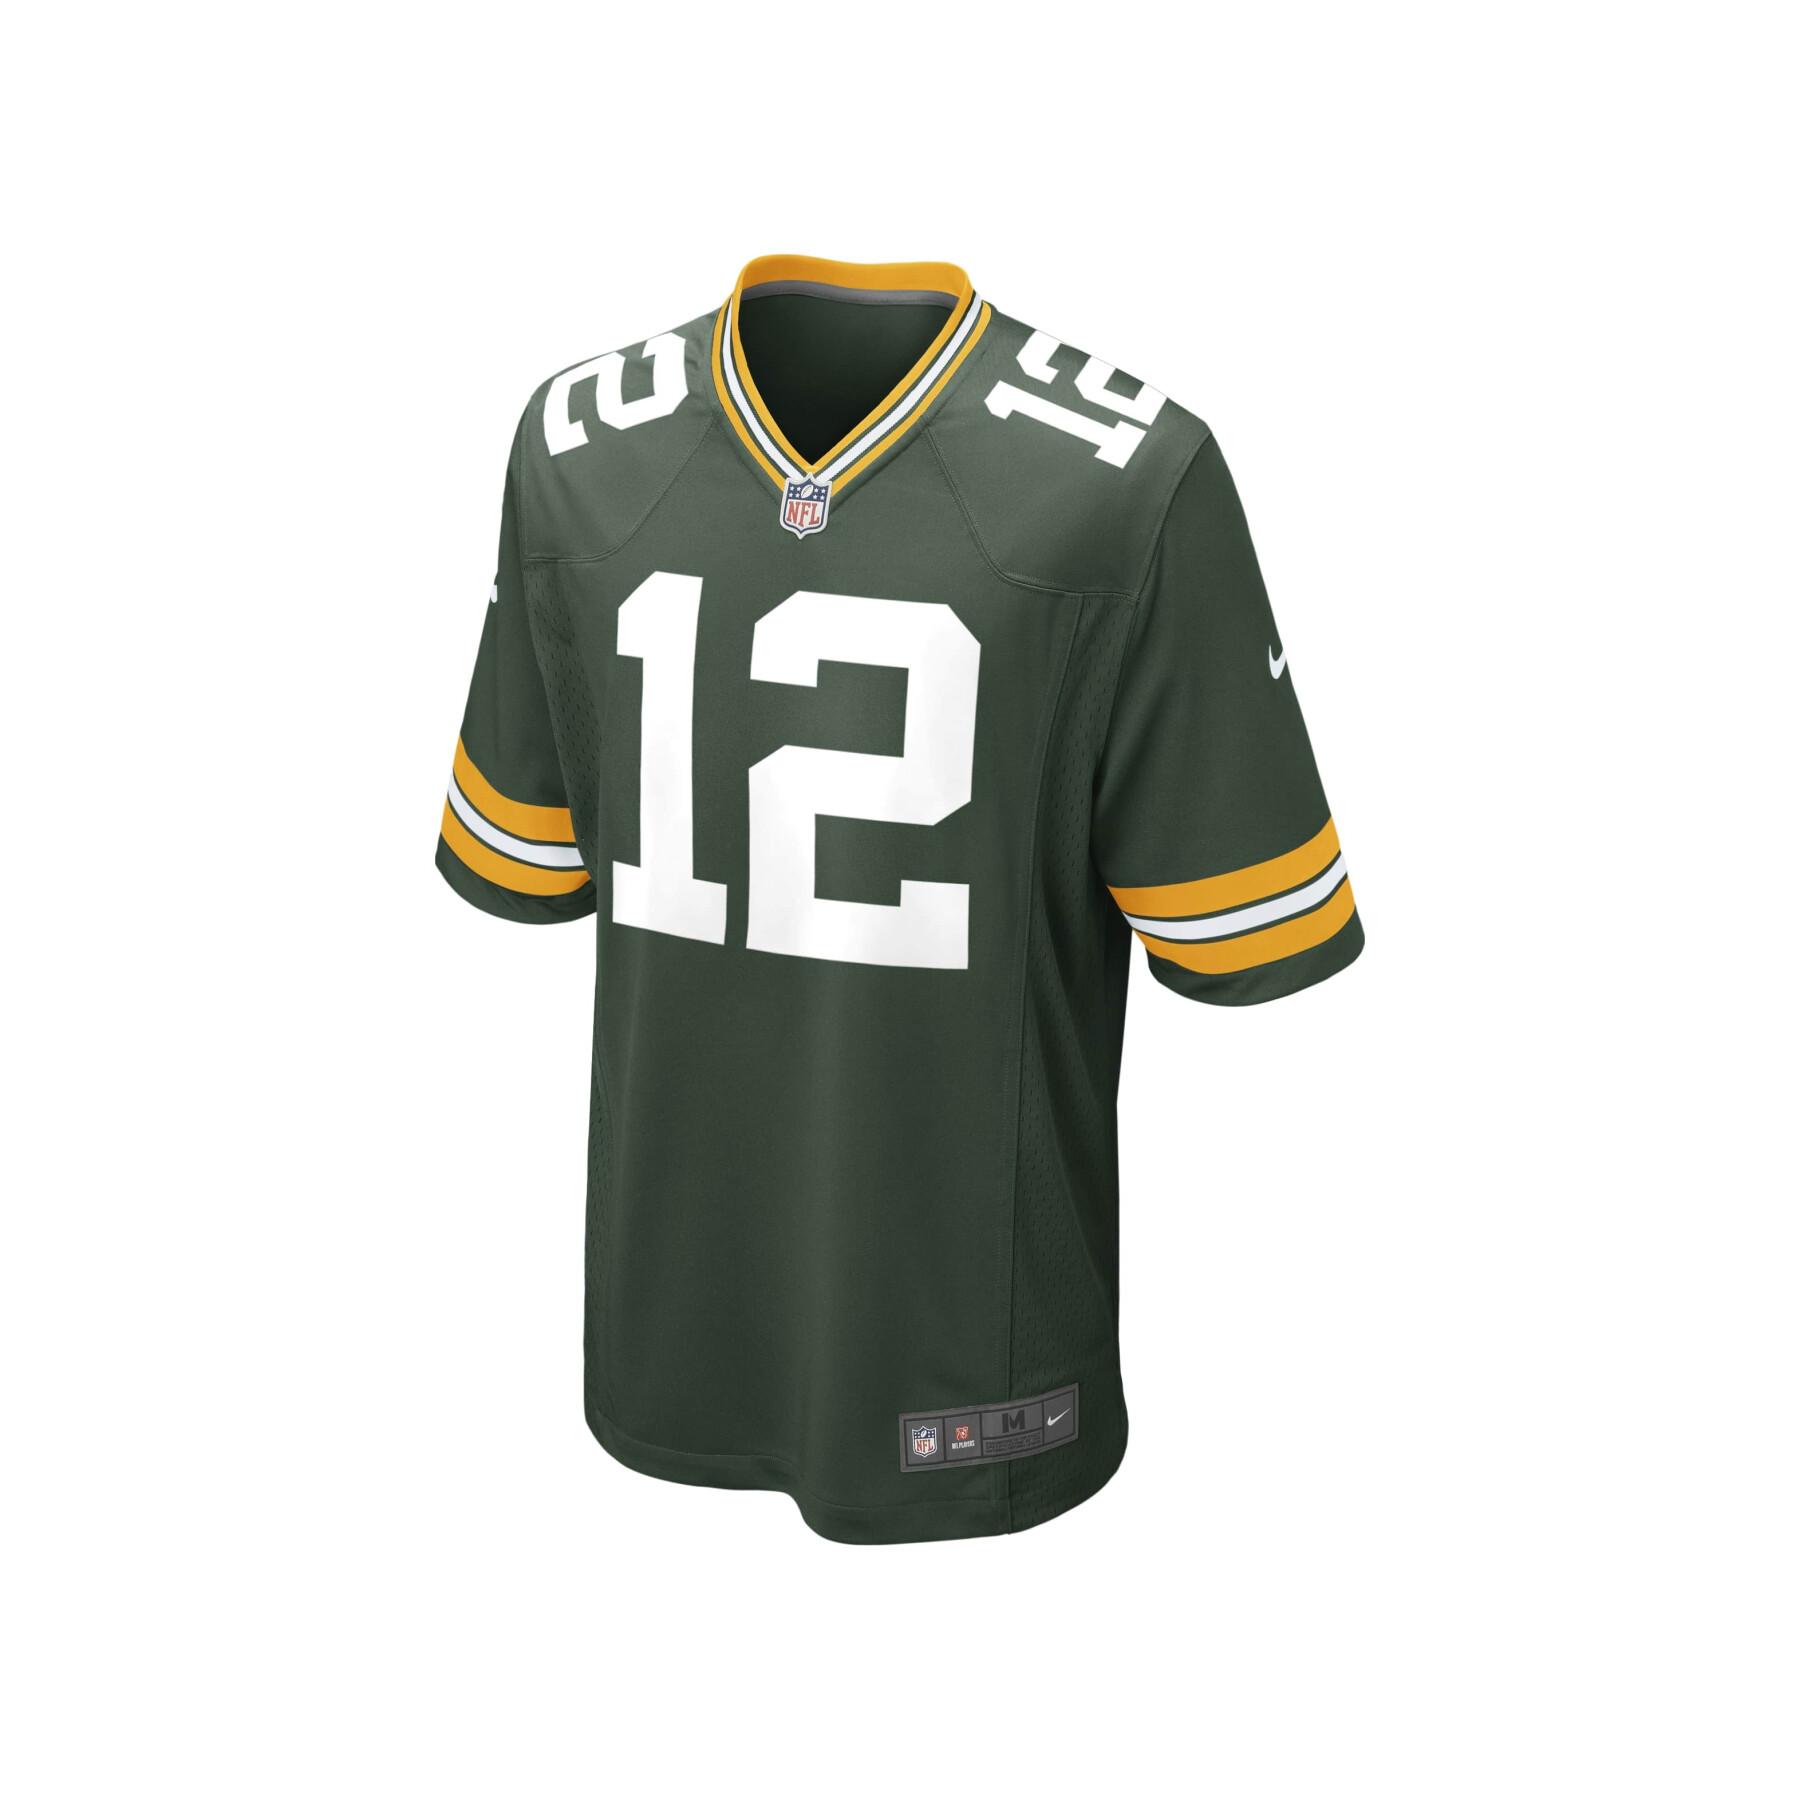 Camisola Green Bay Packers "Aaron Rodgers" temporada 2021/22